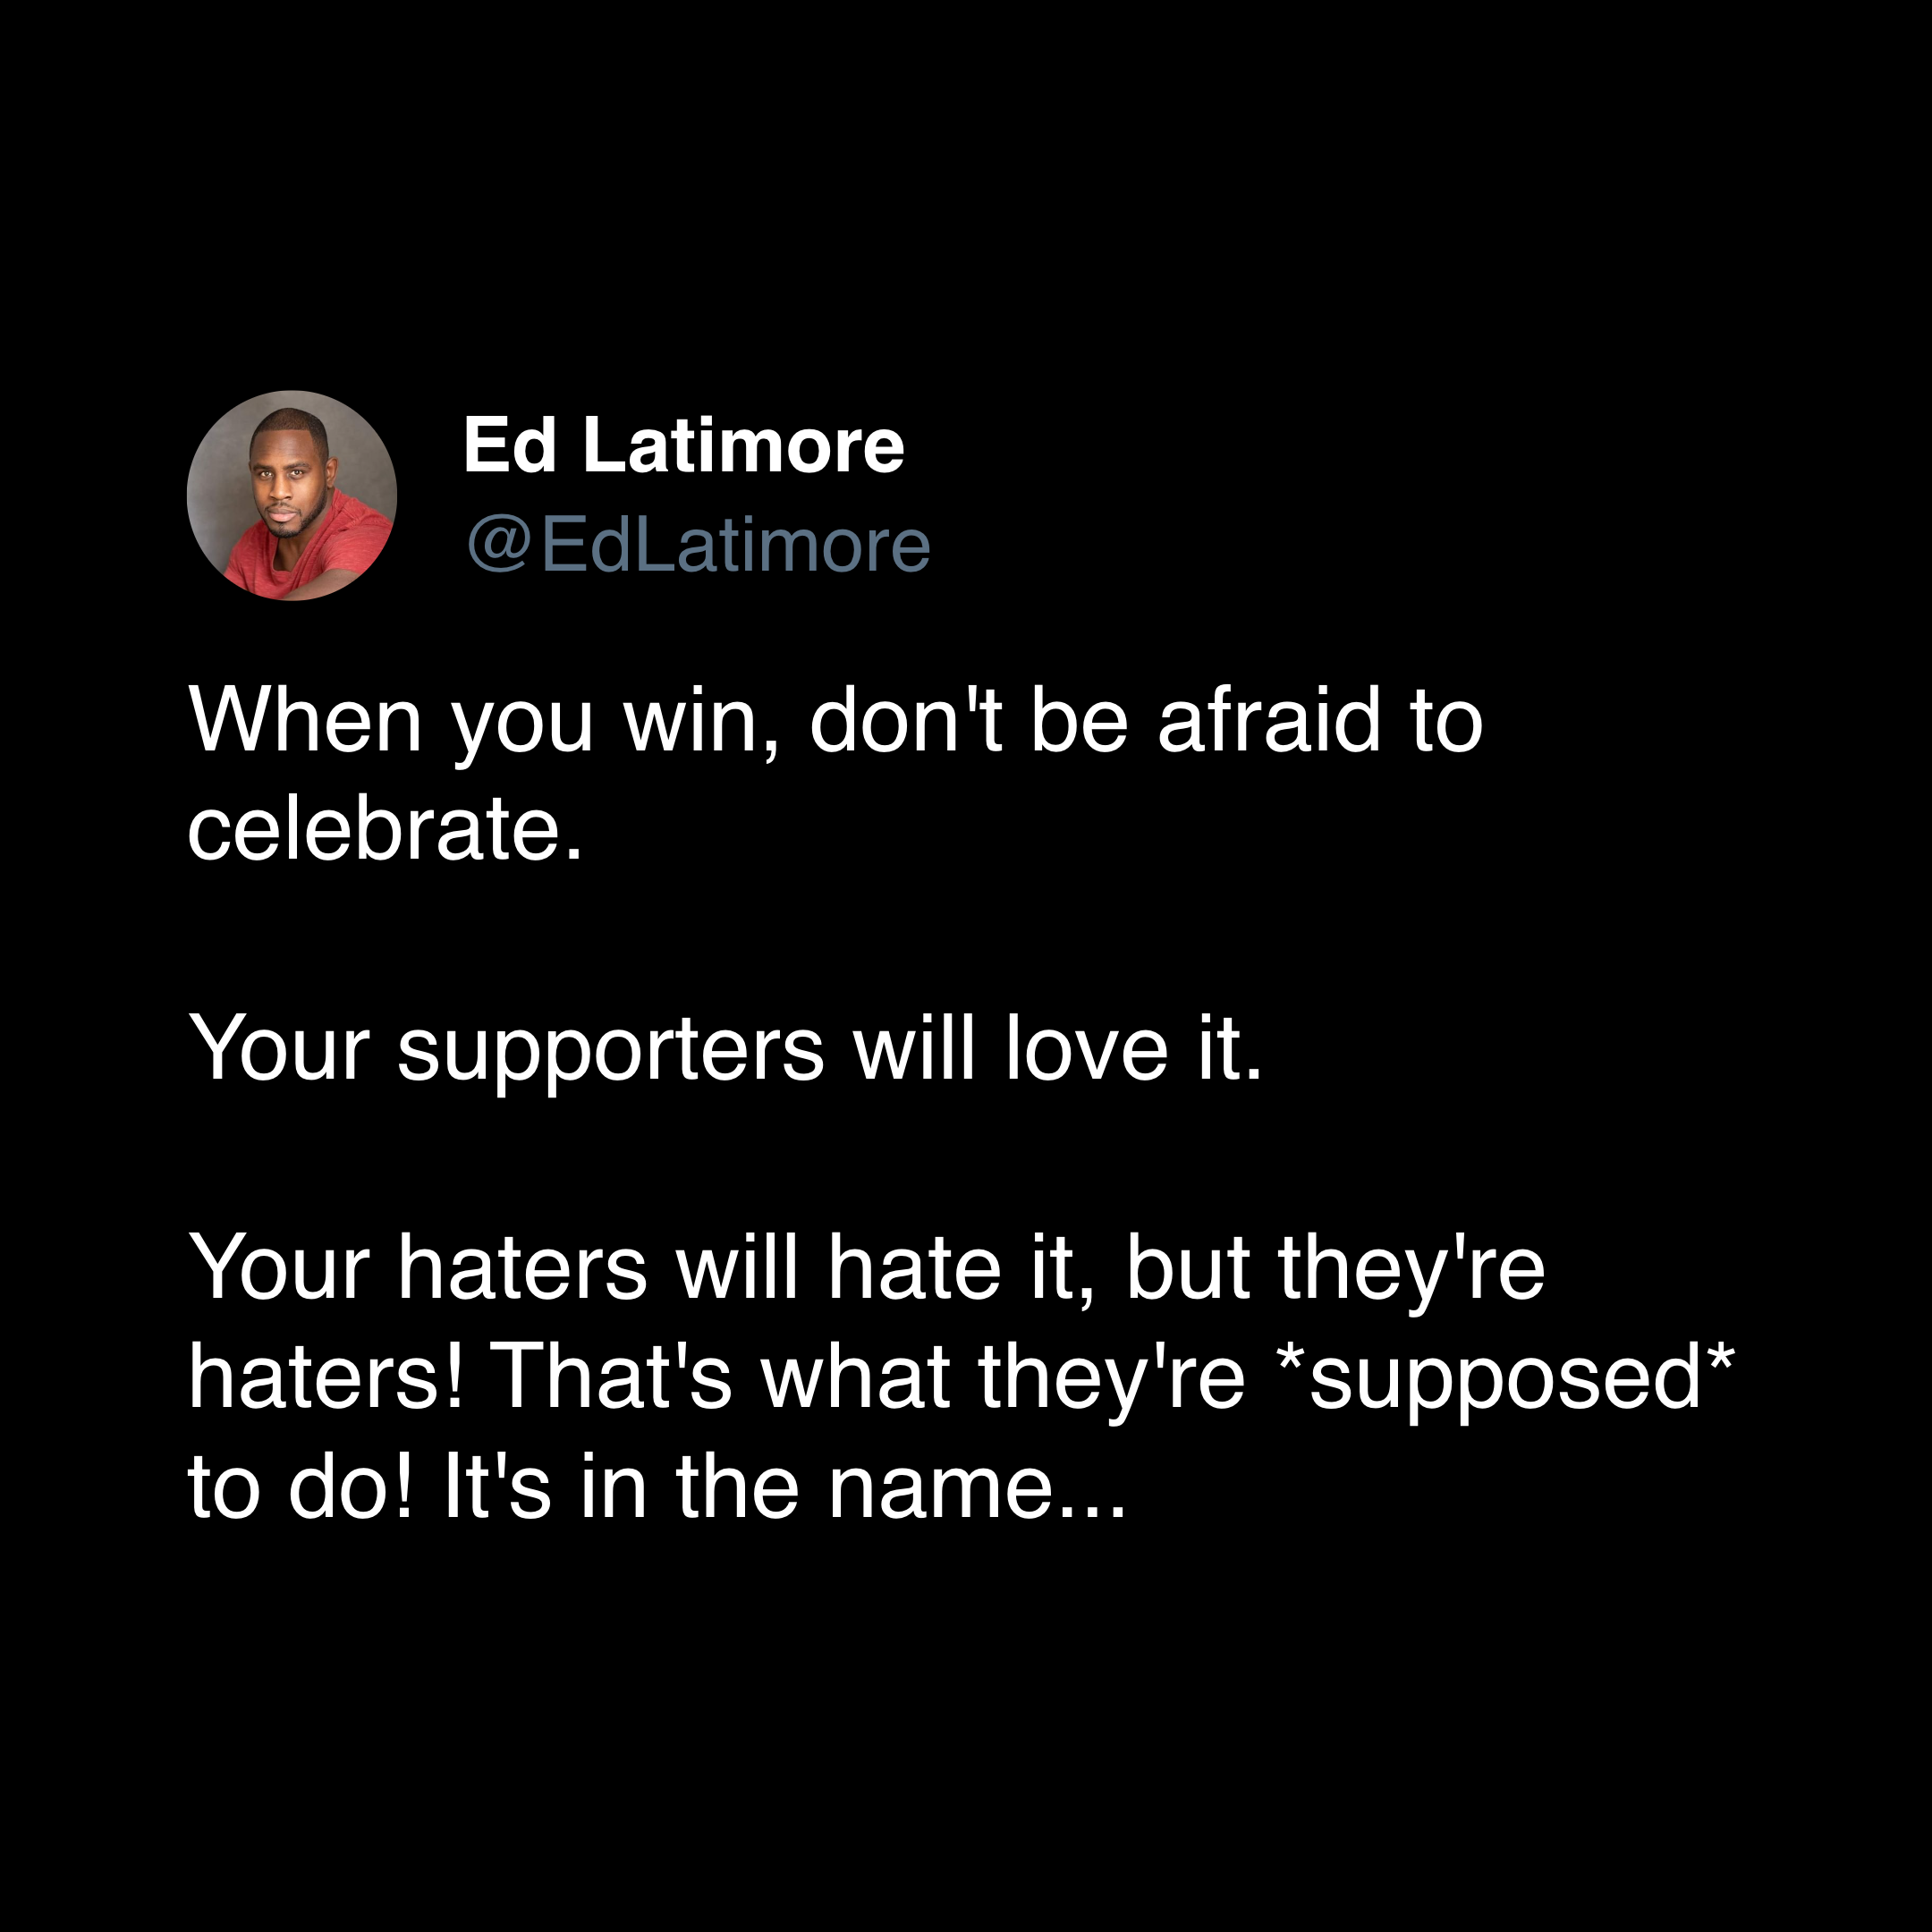 ed latimore hater quote "don't be afraid to celebrate"